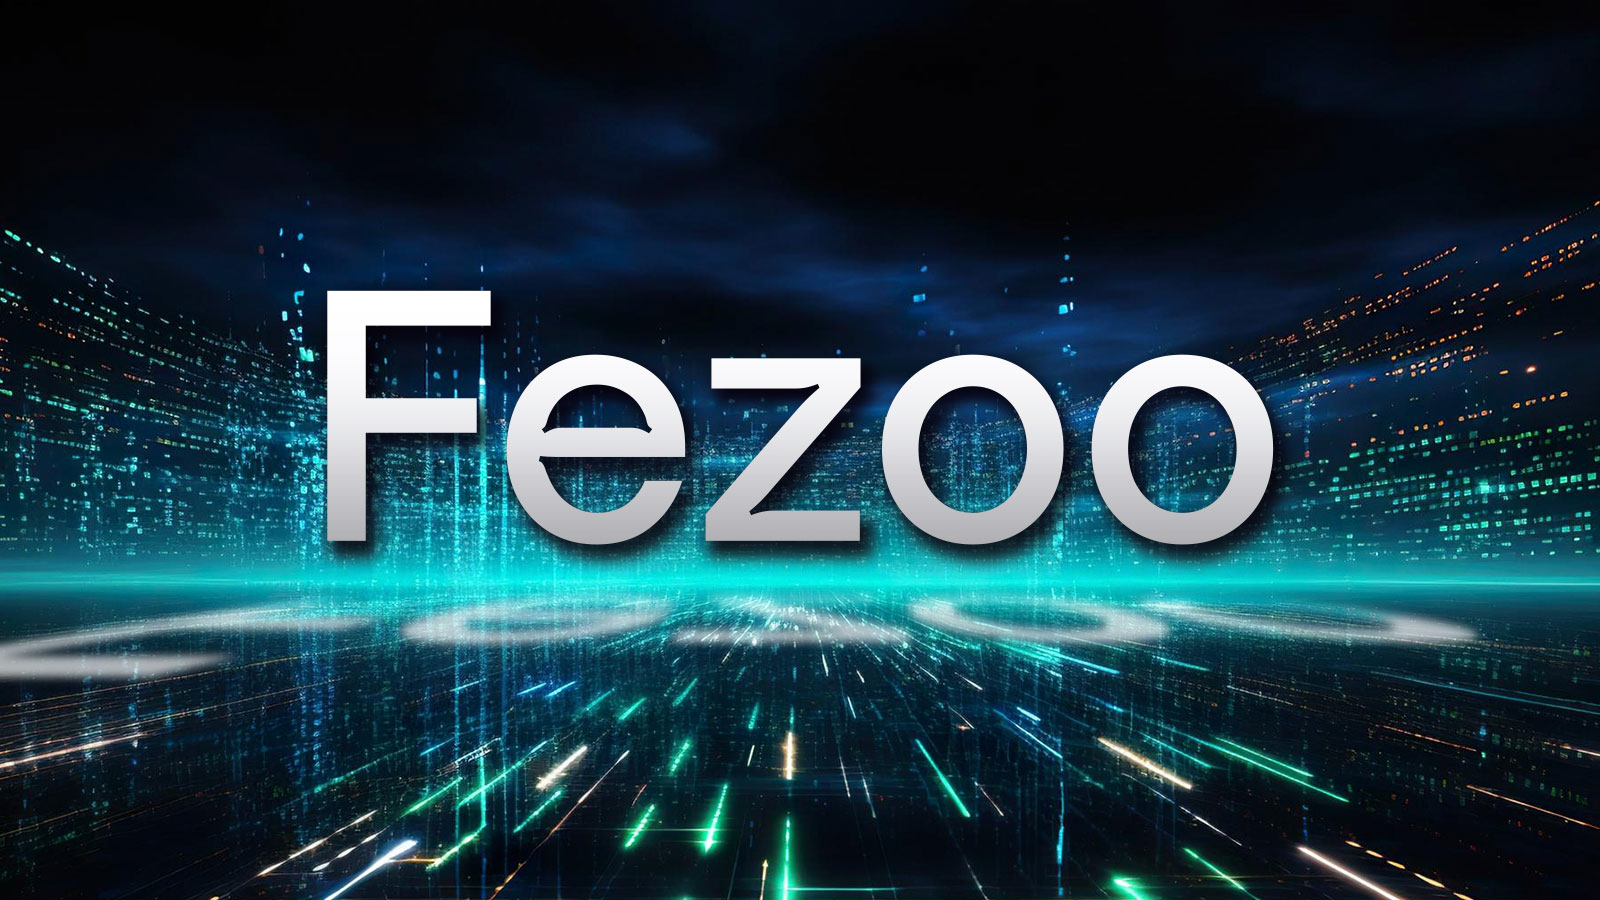 Fezoo (FEZ) Preliminary Asset Sale Might be Spotlighted in April as Cardano (ADA), Polkadot (DOT) Biggest Altcoins Surge Again